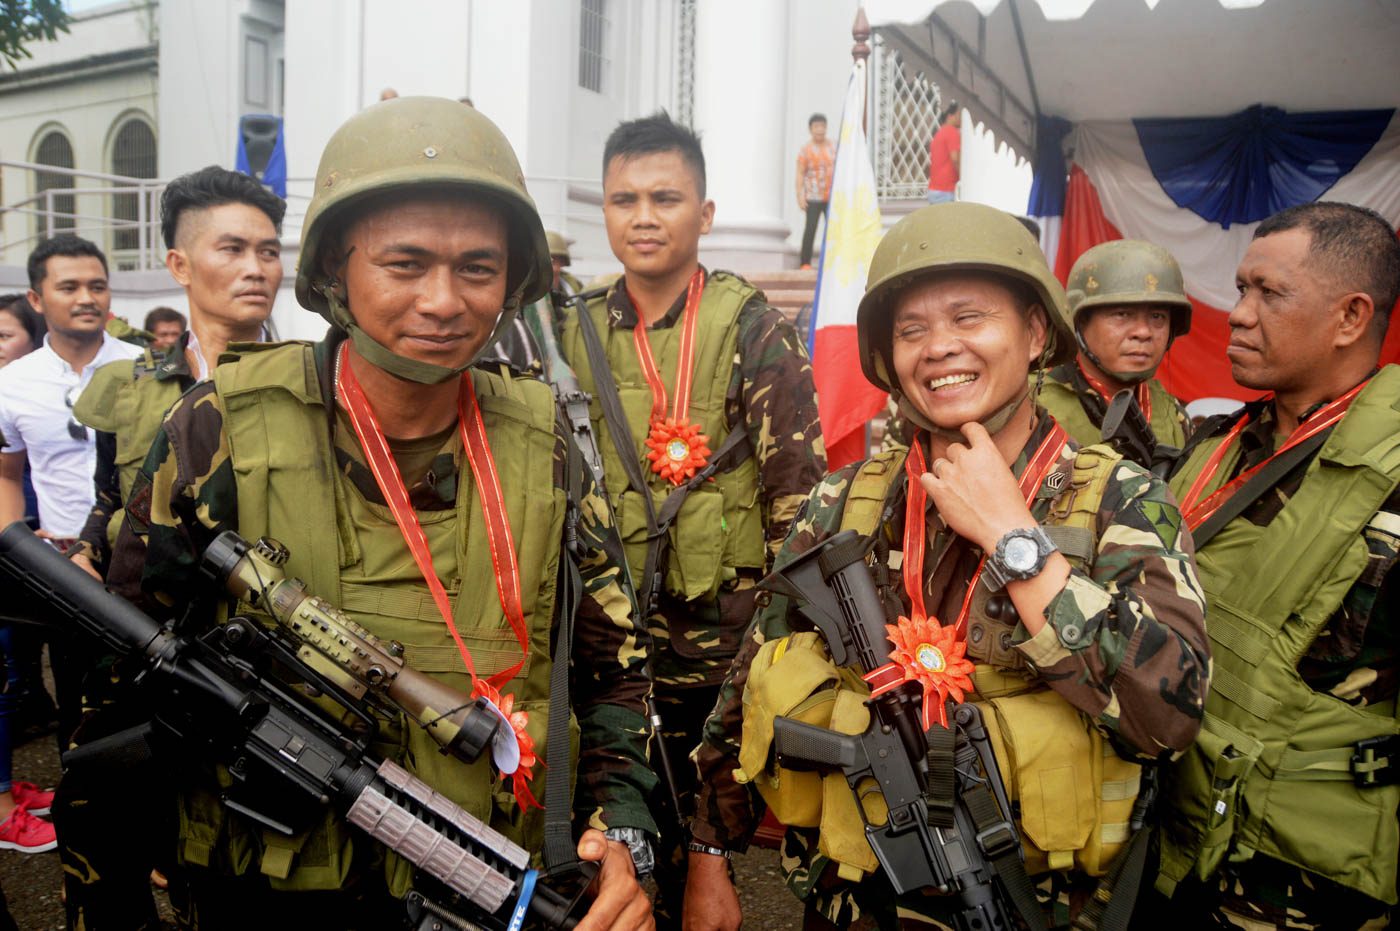 Negros Occidental honors Marawi soldiers